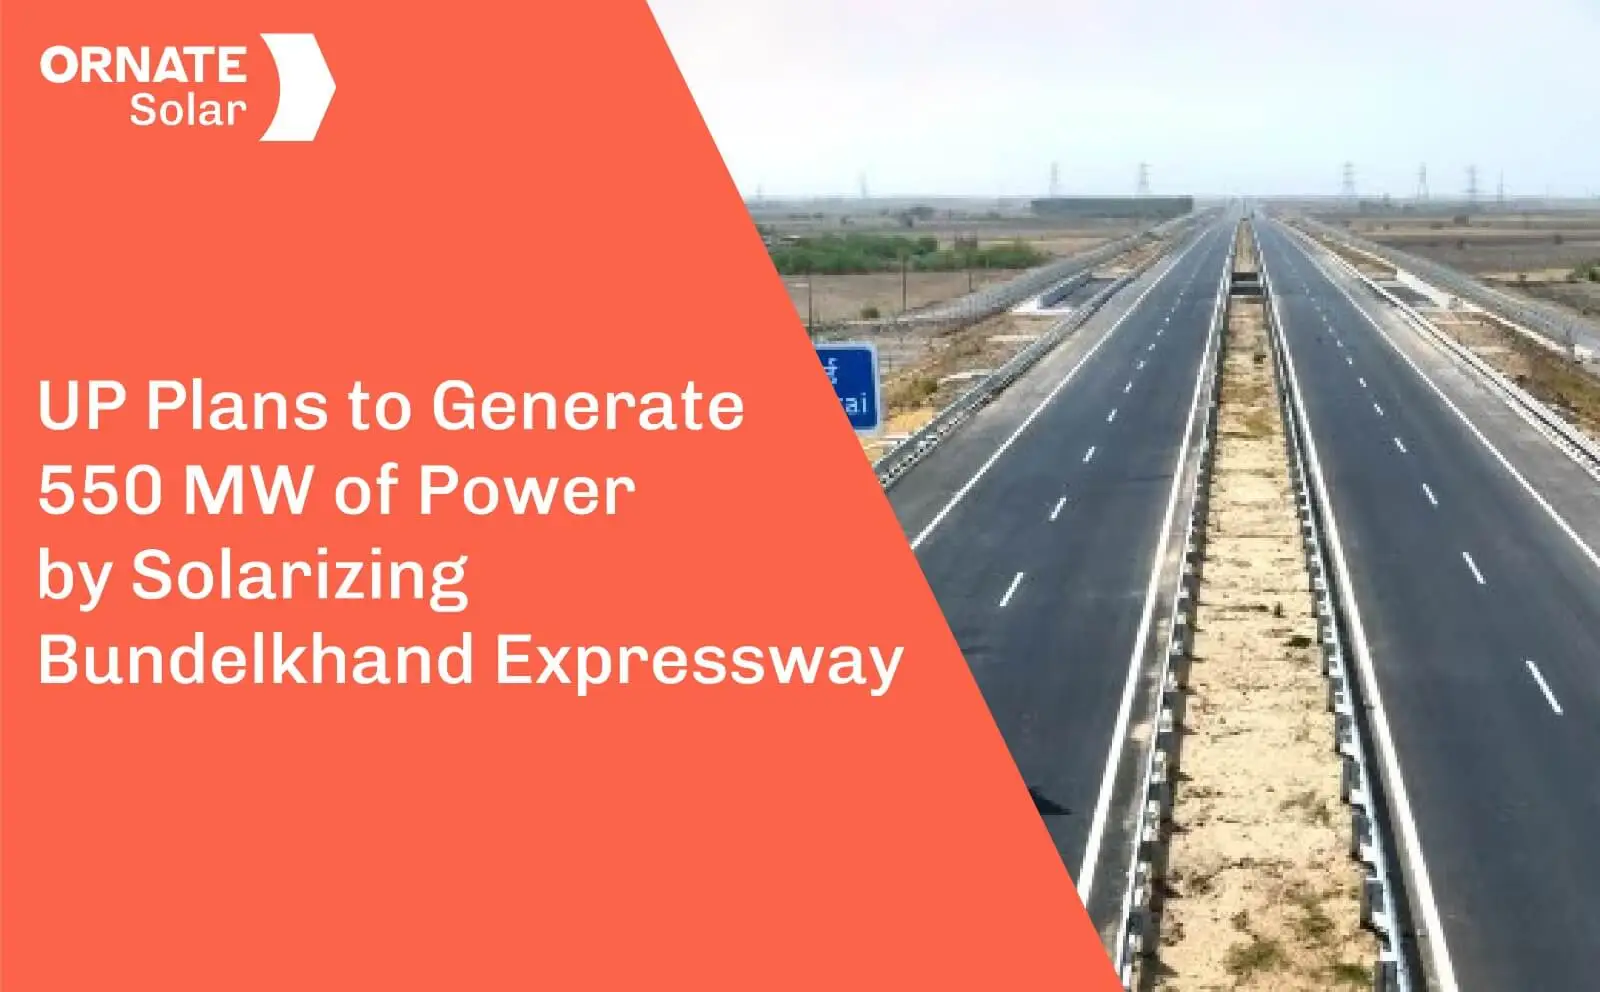 UP Plans to Generate 550 MW of Power by Solarizing Bundelkhand Expressway